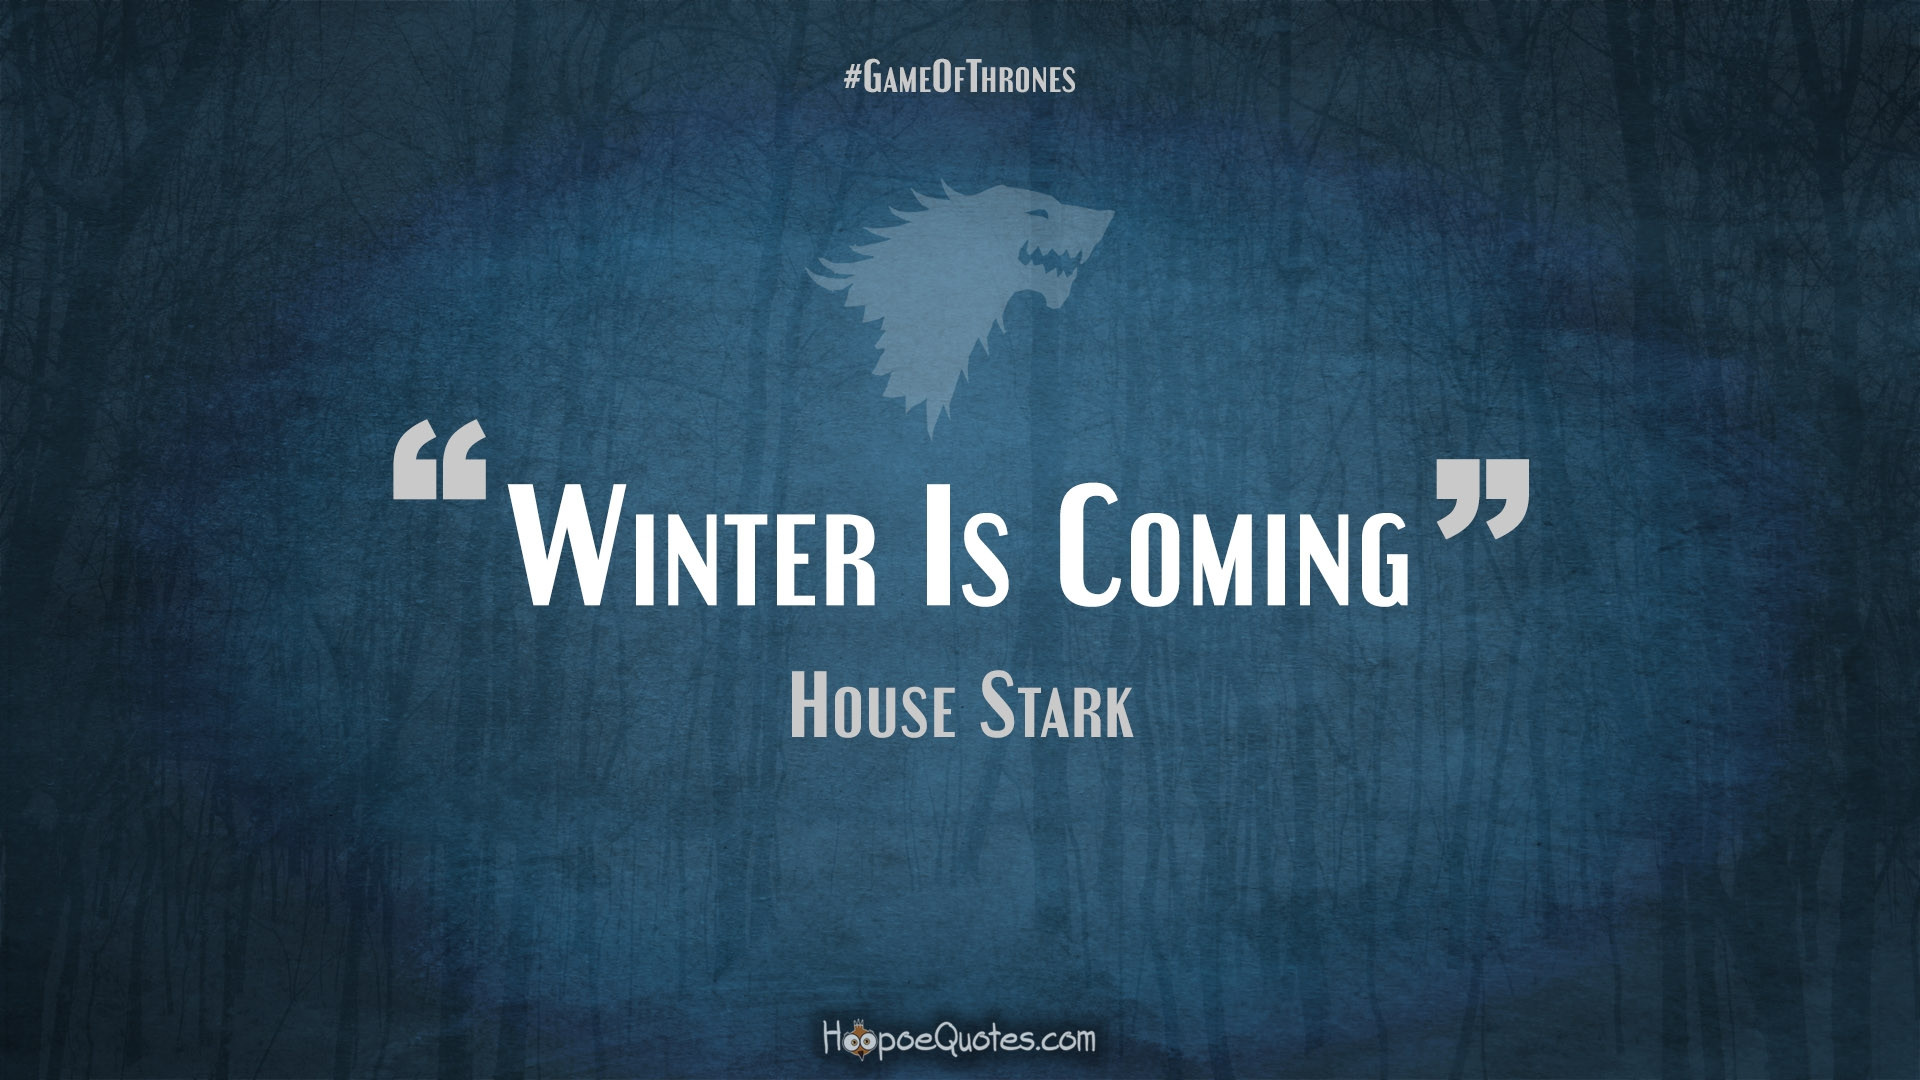 Winter Is Coming Quotes
 Winter Is ing HoopoeQuotes